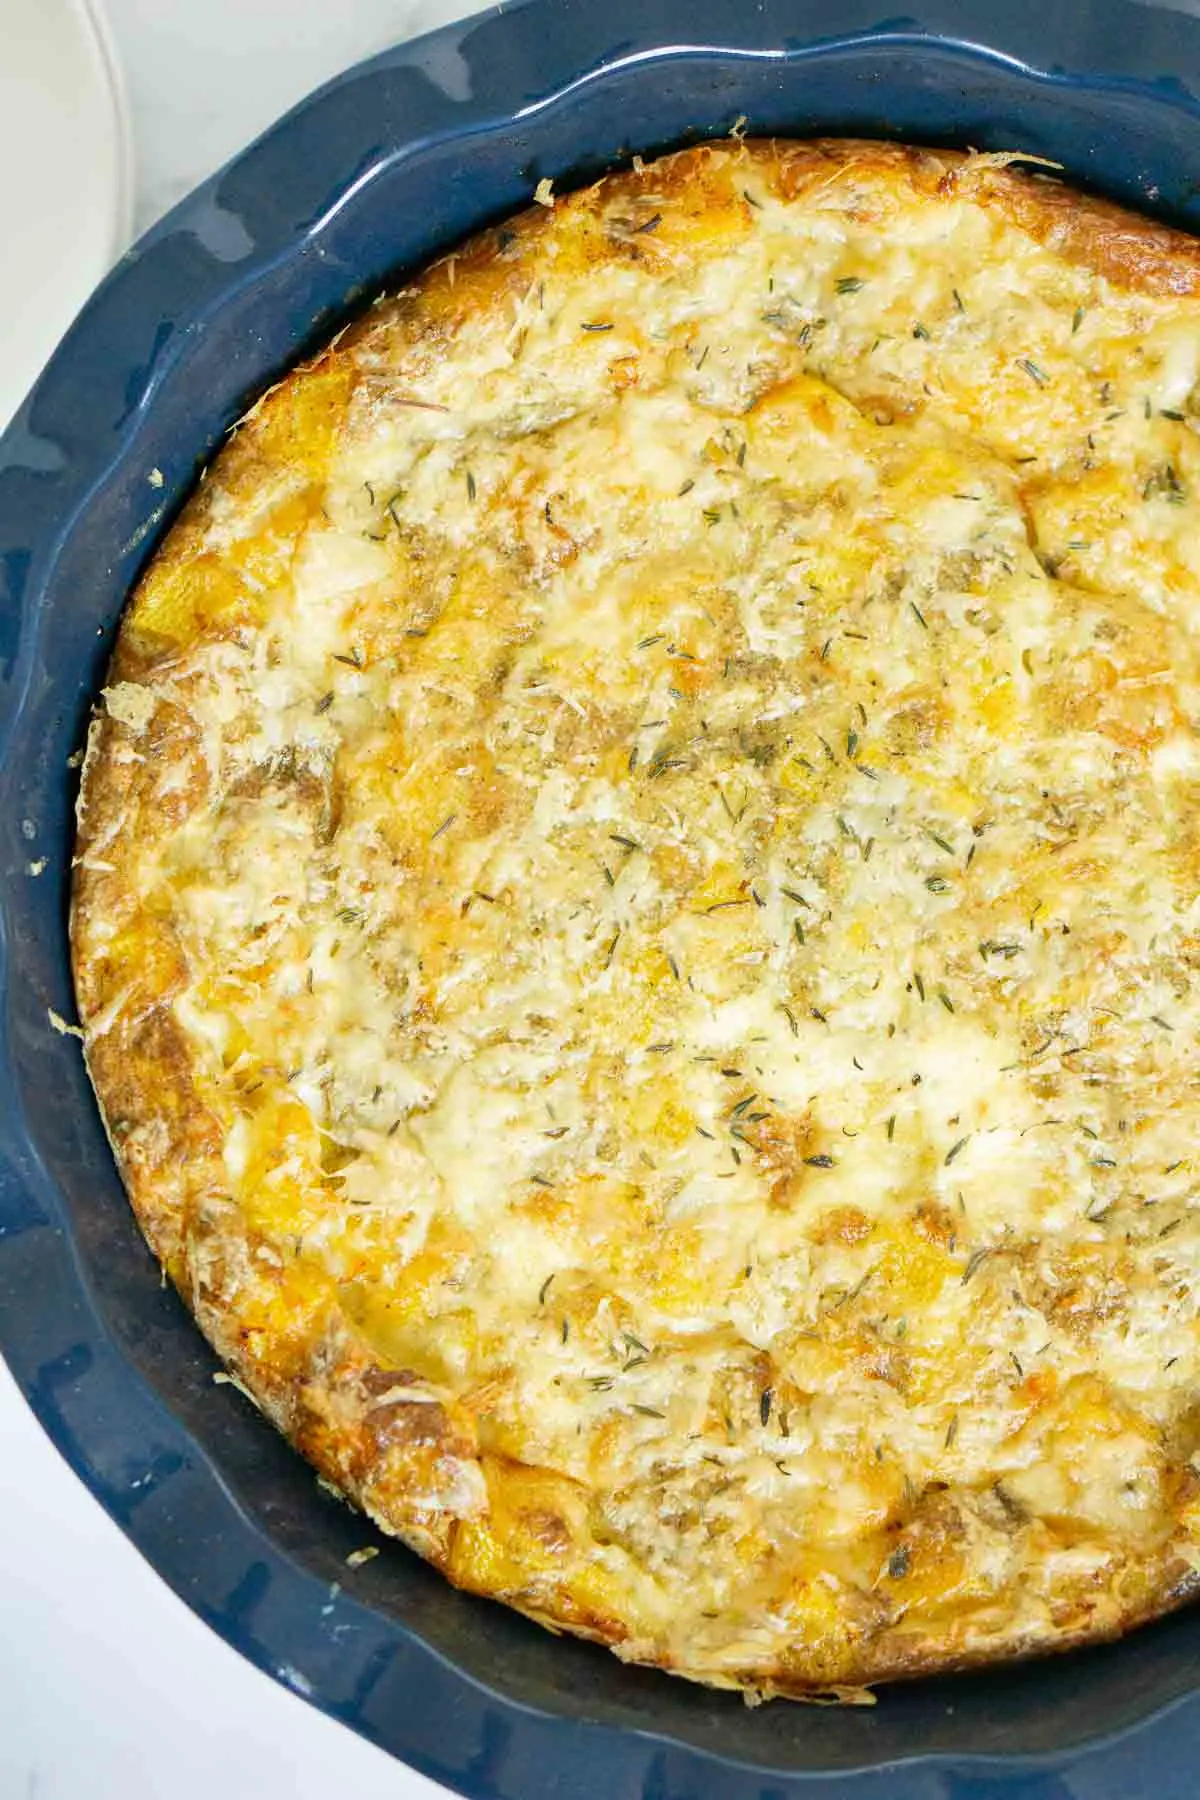 Baked frittata in a pie dish